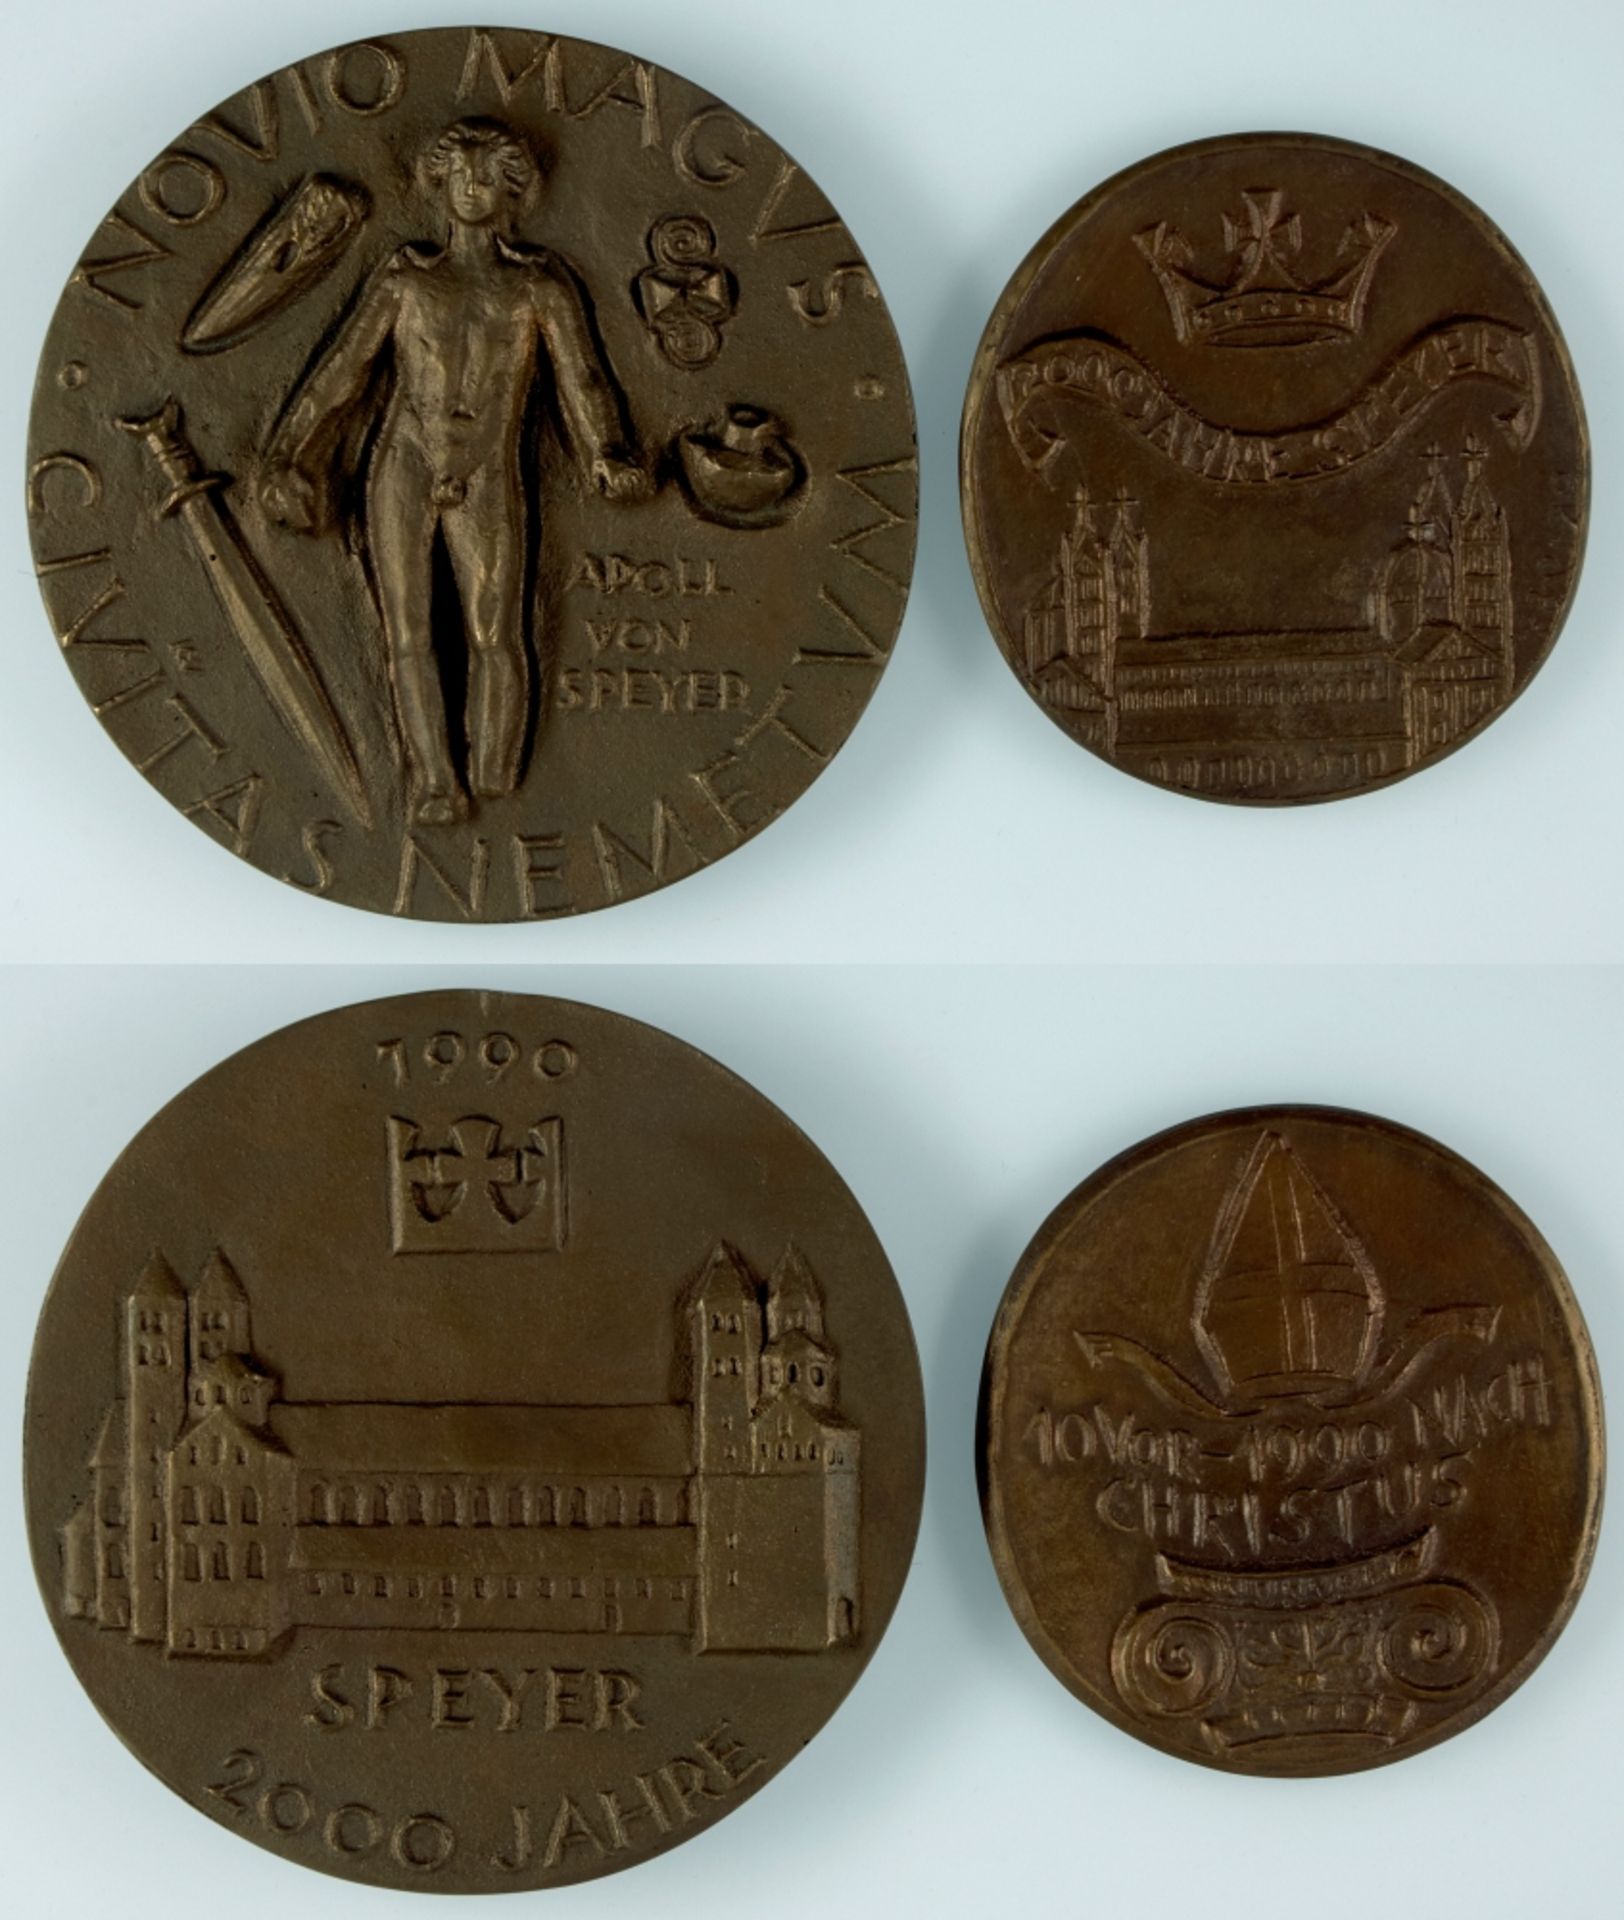 Speyer, lot of two bronze casting medals to the 2000 year-old City anniversary. Diameter in each